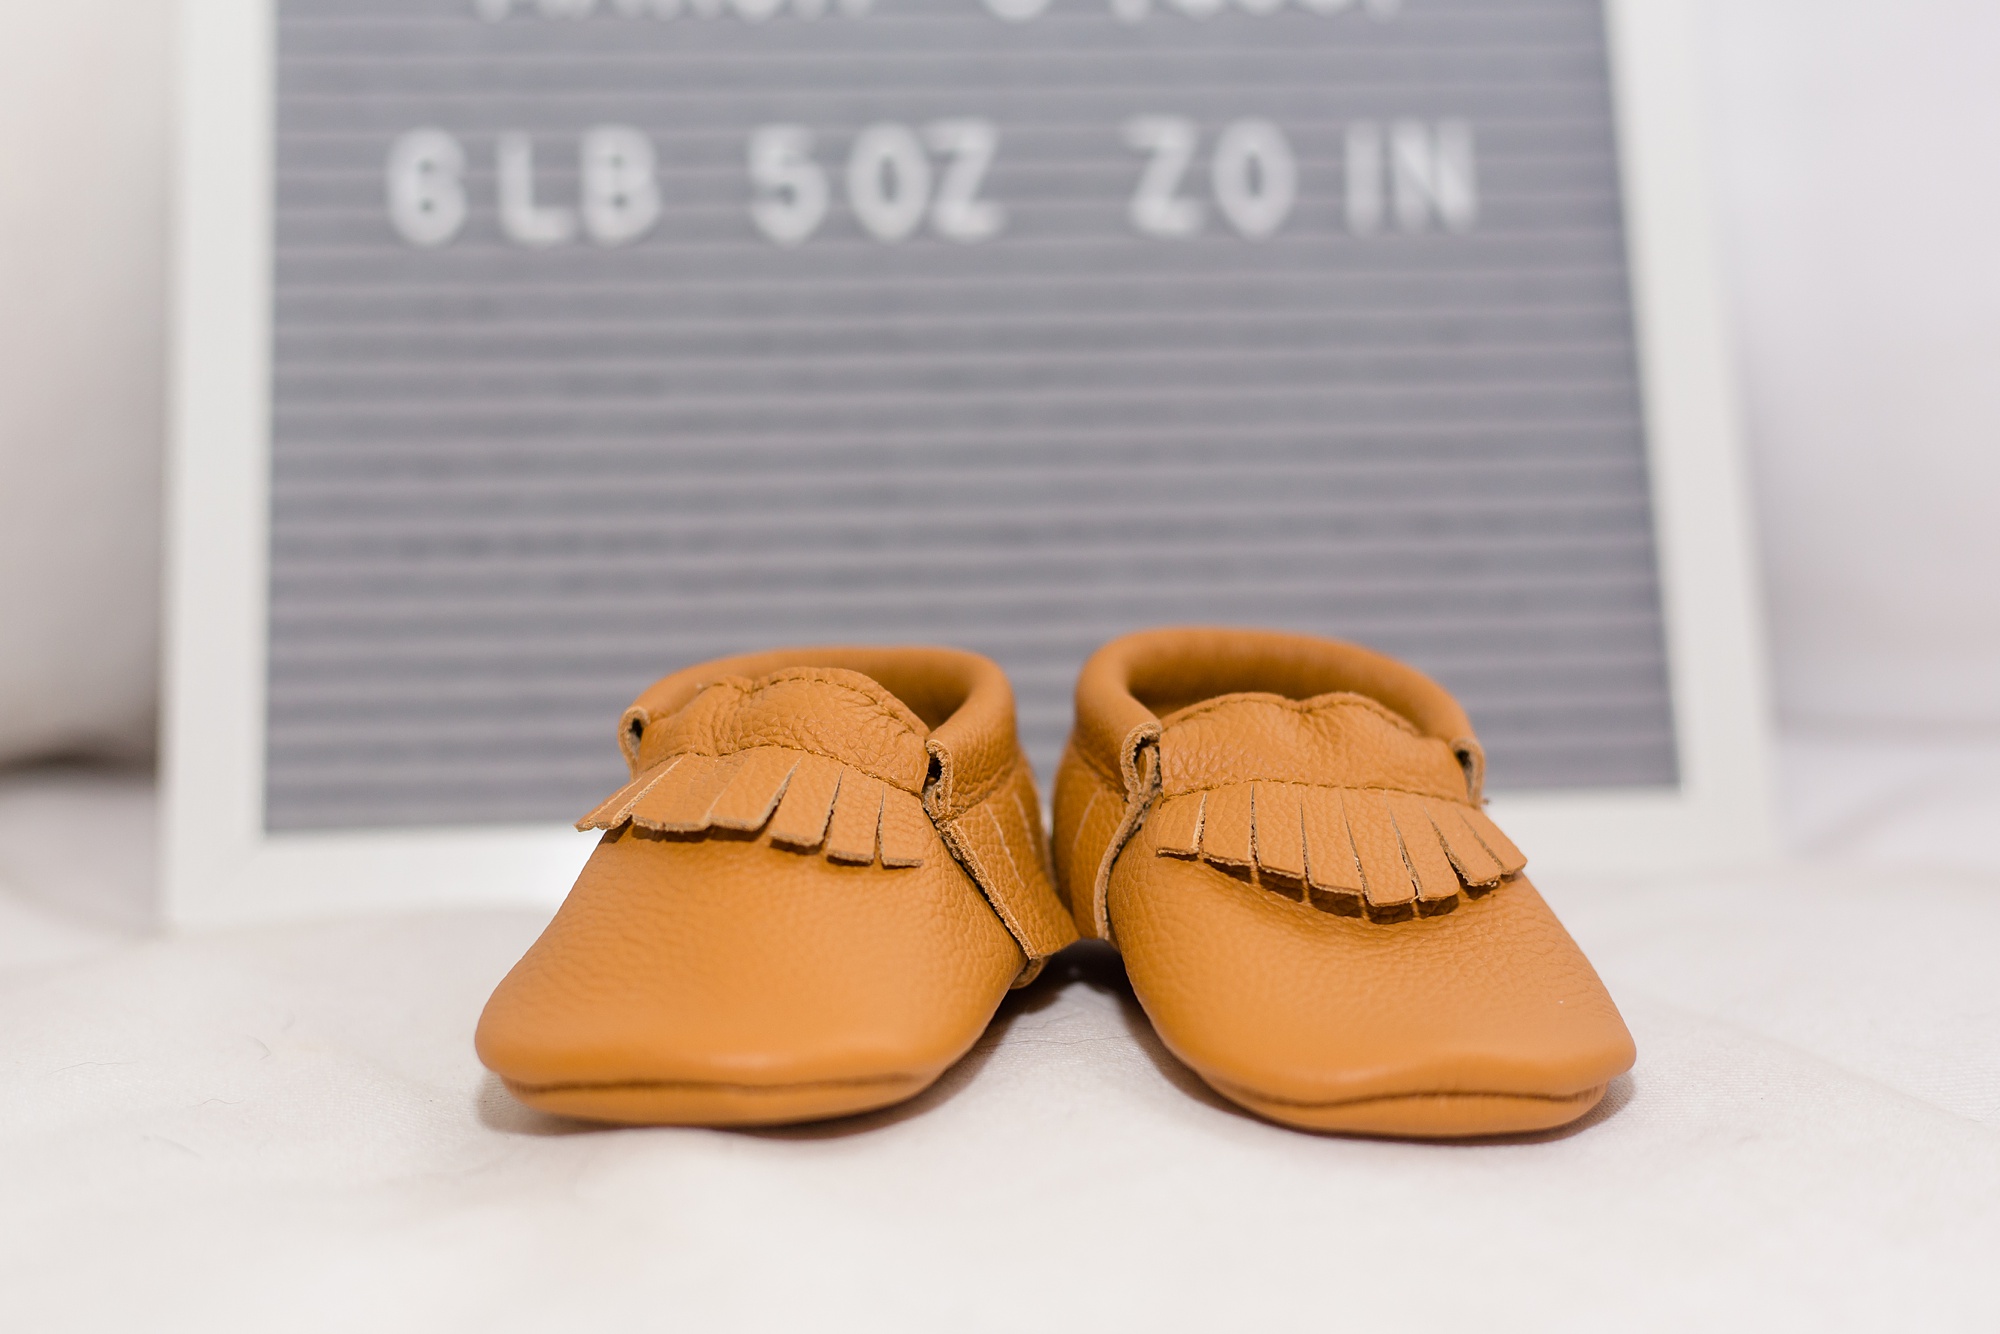 baby moccasins near announcement board for new baby